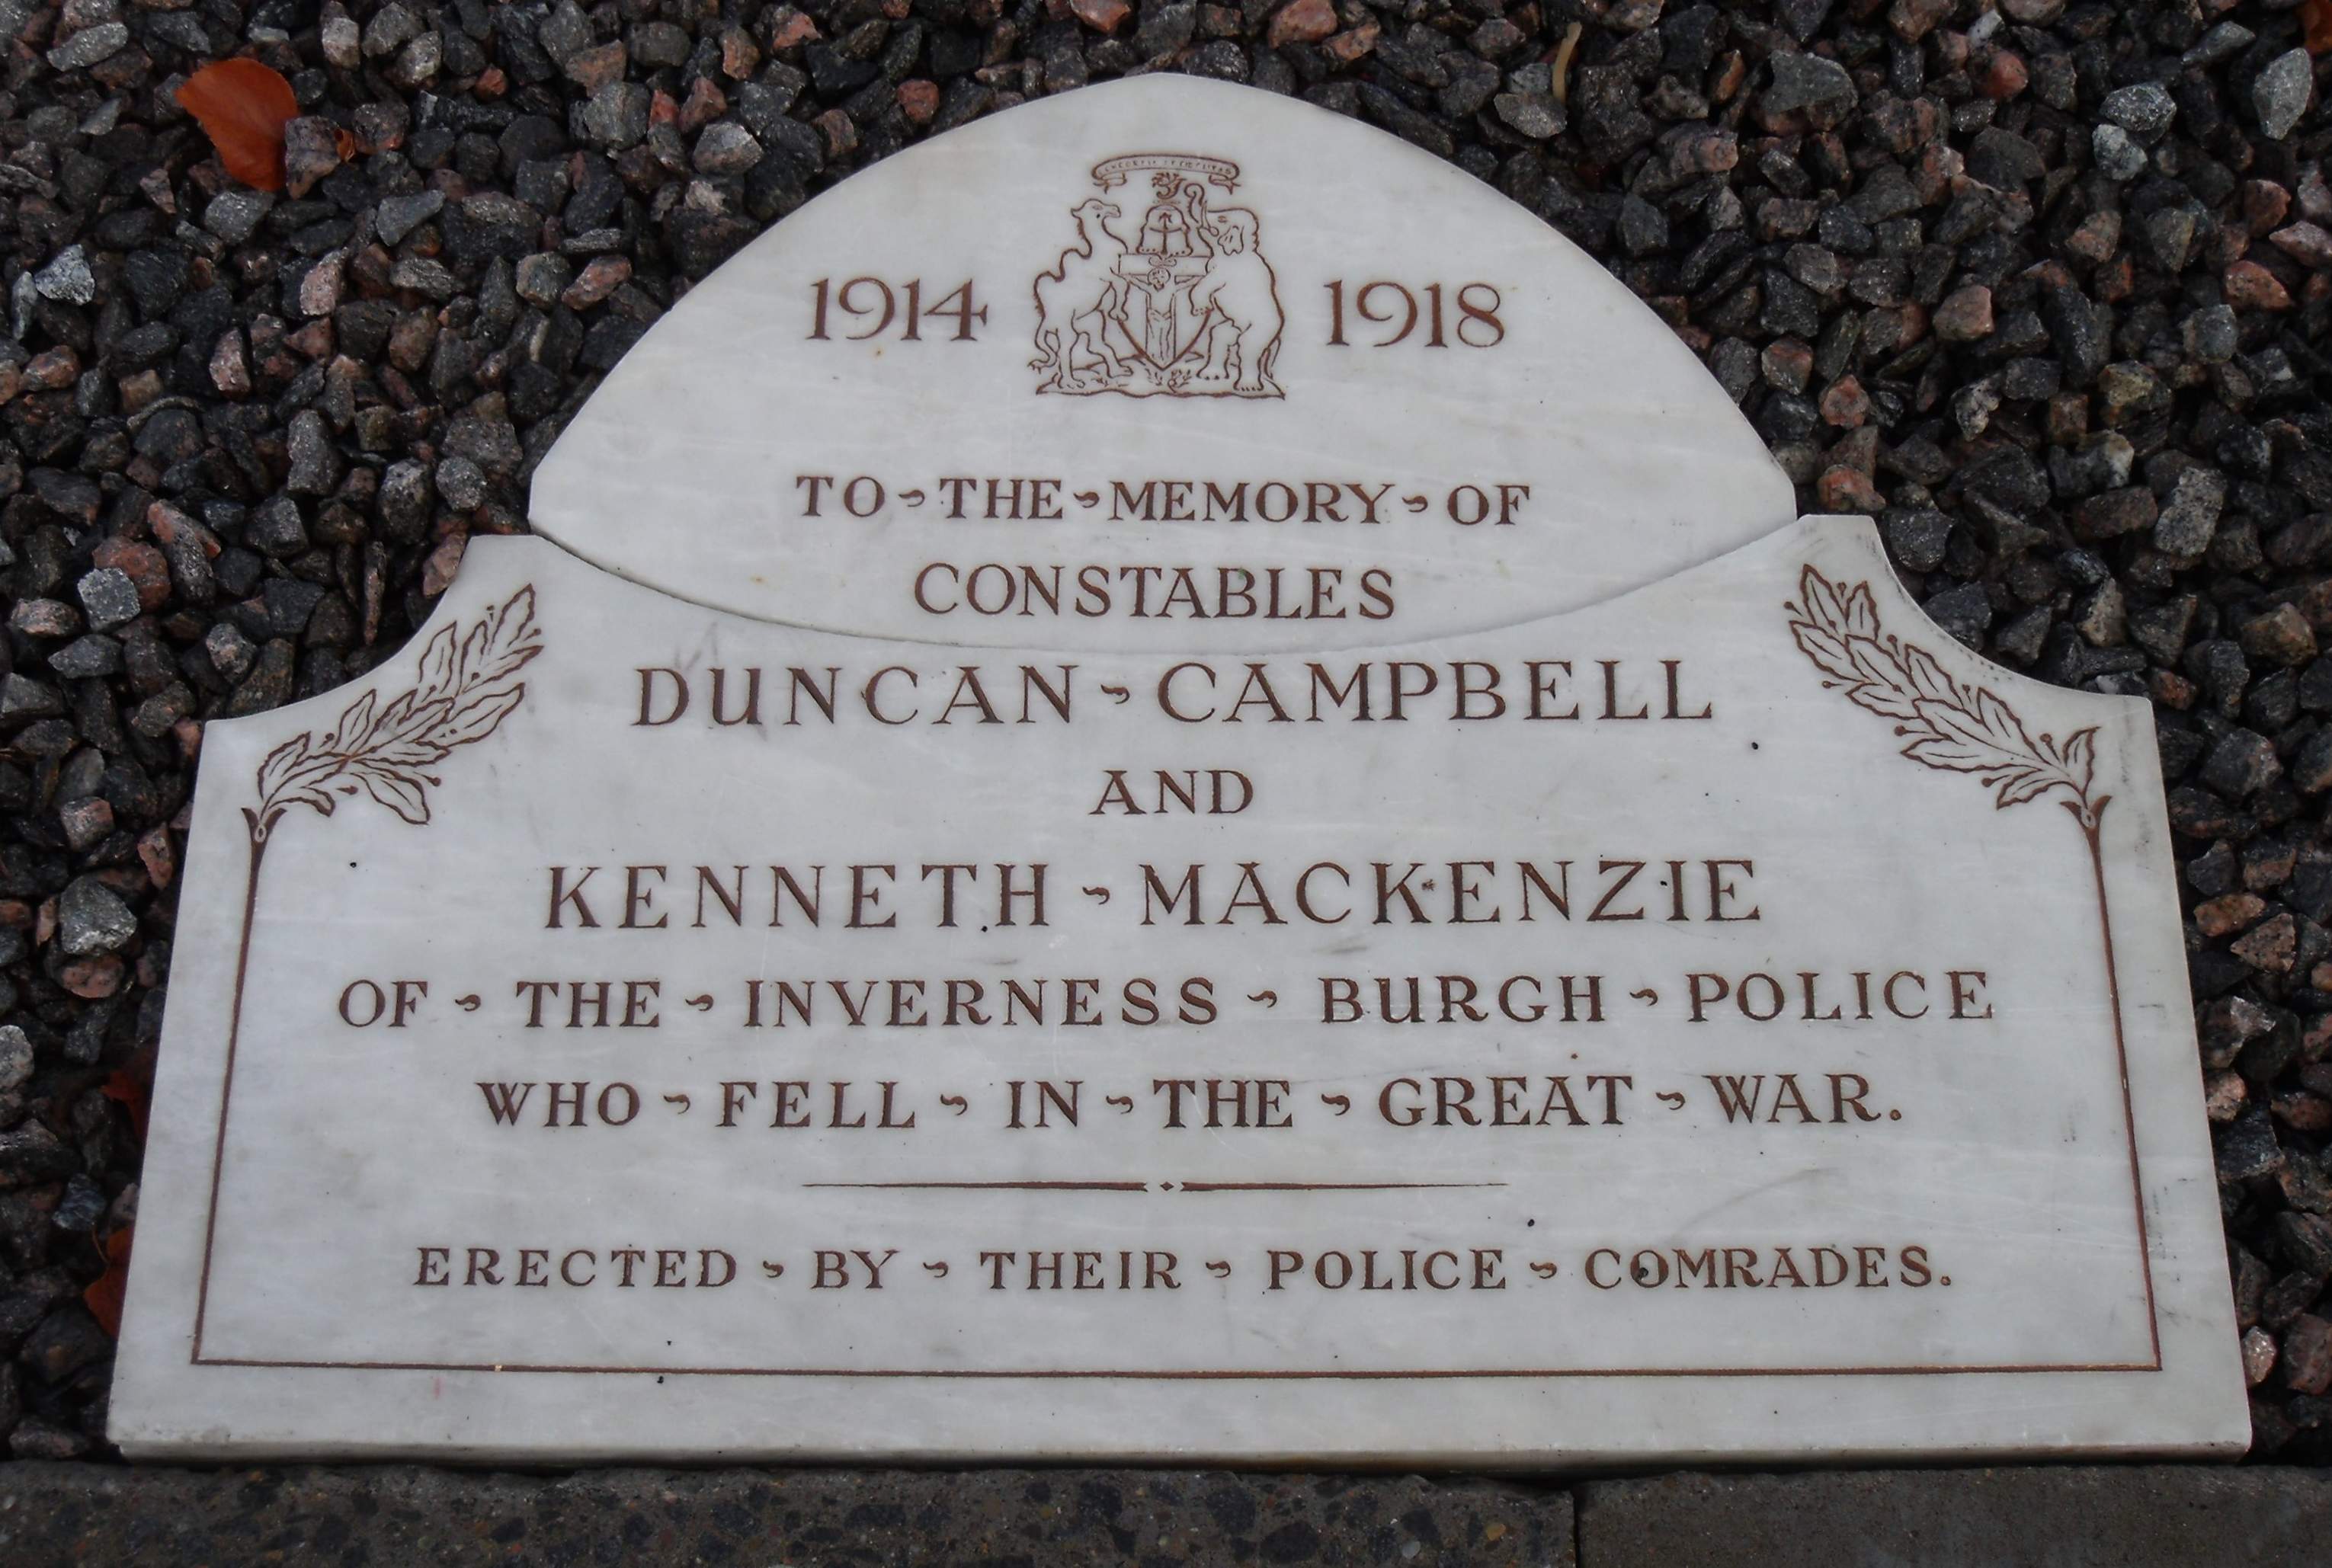 War Memorial – Inverness Burgh Police -  PC Kenneth MacKenzie and PC Duncan Campbell (1914-1918) (broken)